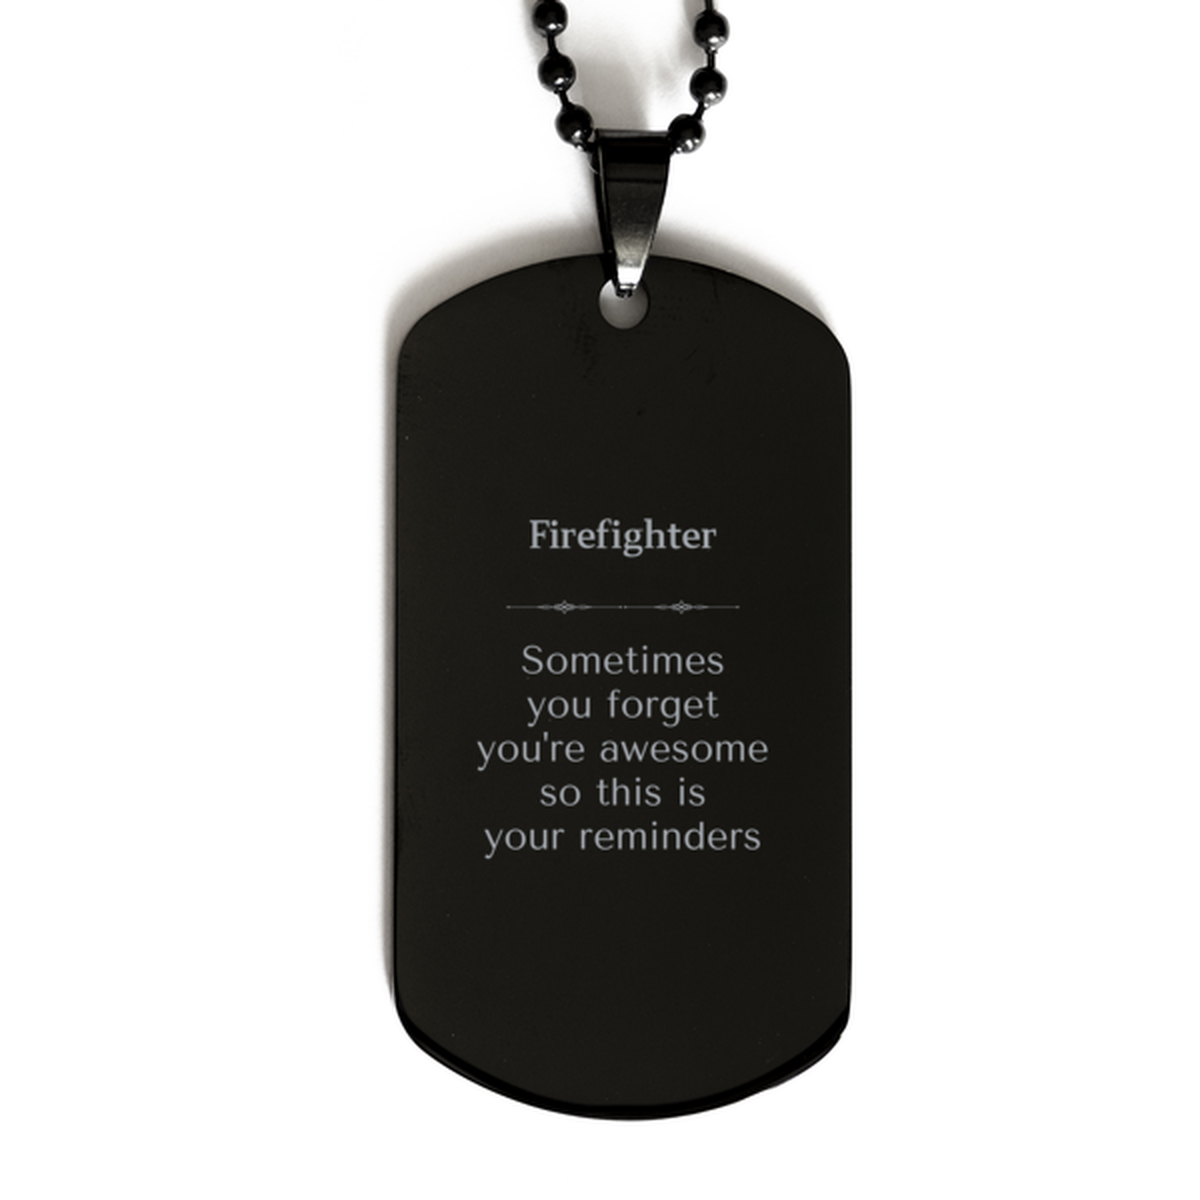 Sentimental Firefighter Black Dog Tag, Firefighter Sometimes you forget you're awesome so this is your reminders, Graduation Christmas Birthday Gifts for Firefighter, Men, Women, Coworkers